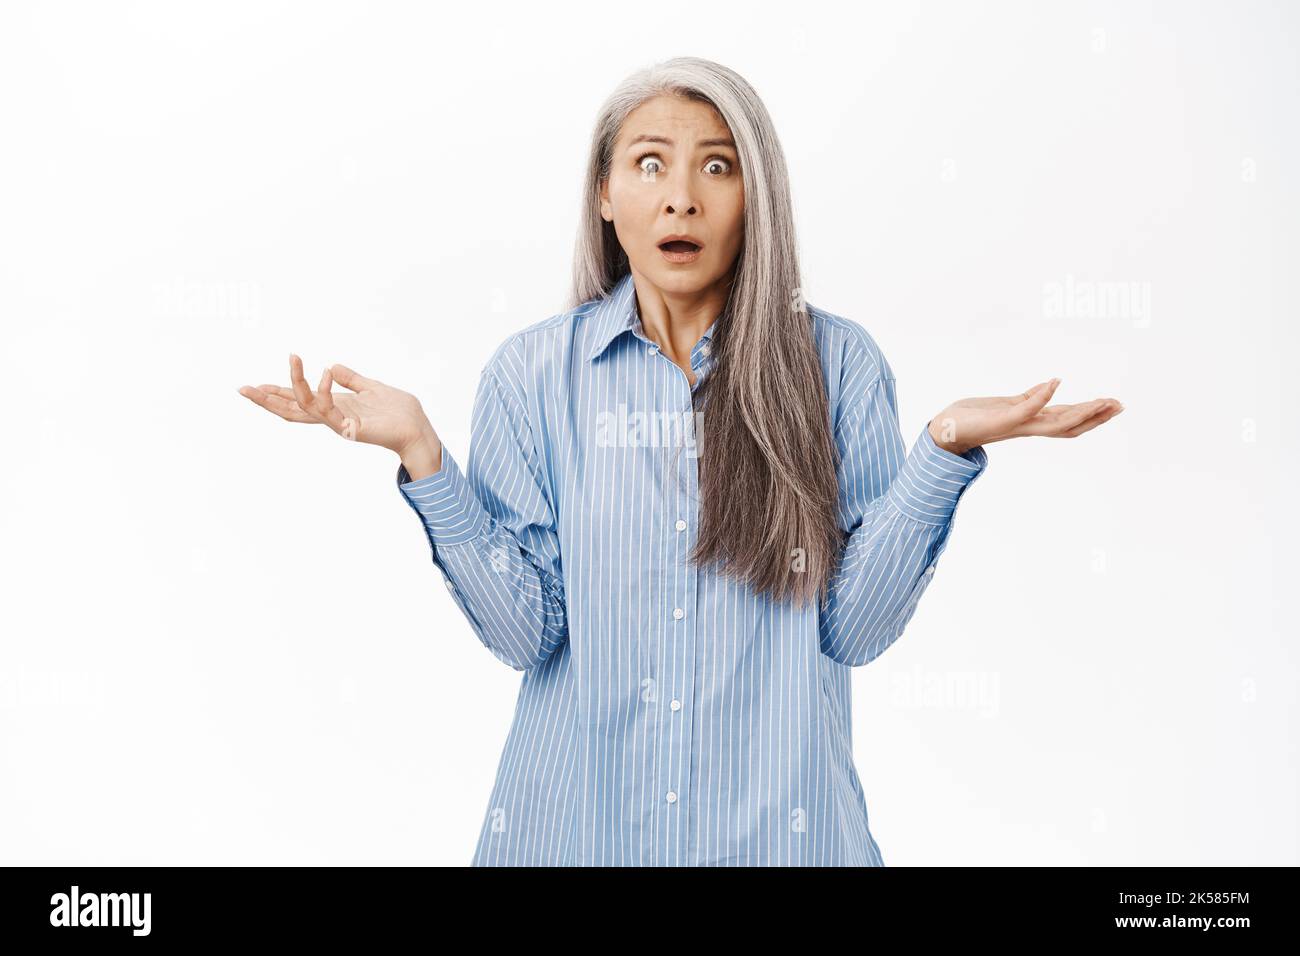 Shocked and confused senior asian woman, middle aged korean lady shrugging shoulders and looking puzzled, standing over white background Stock Photo